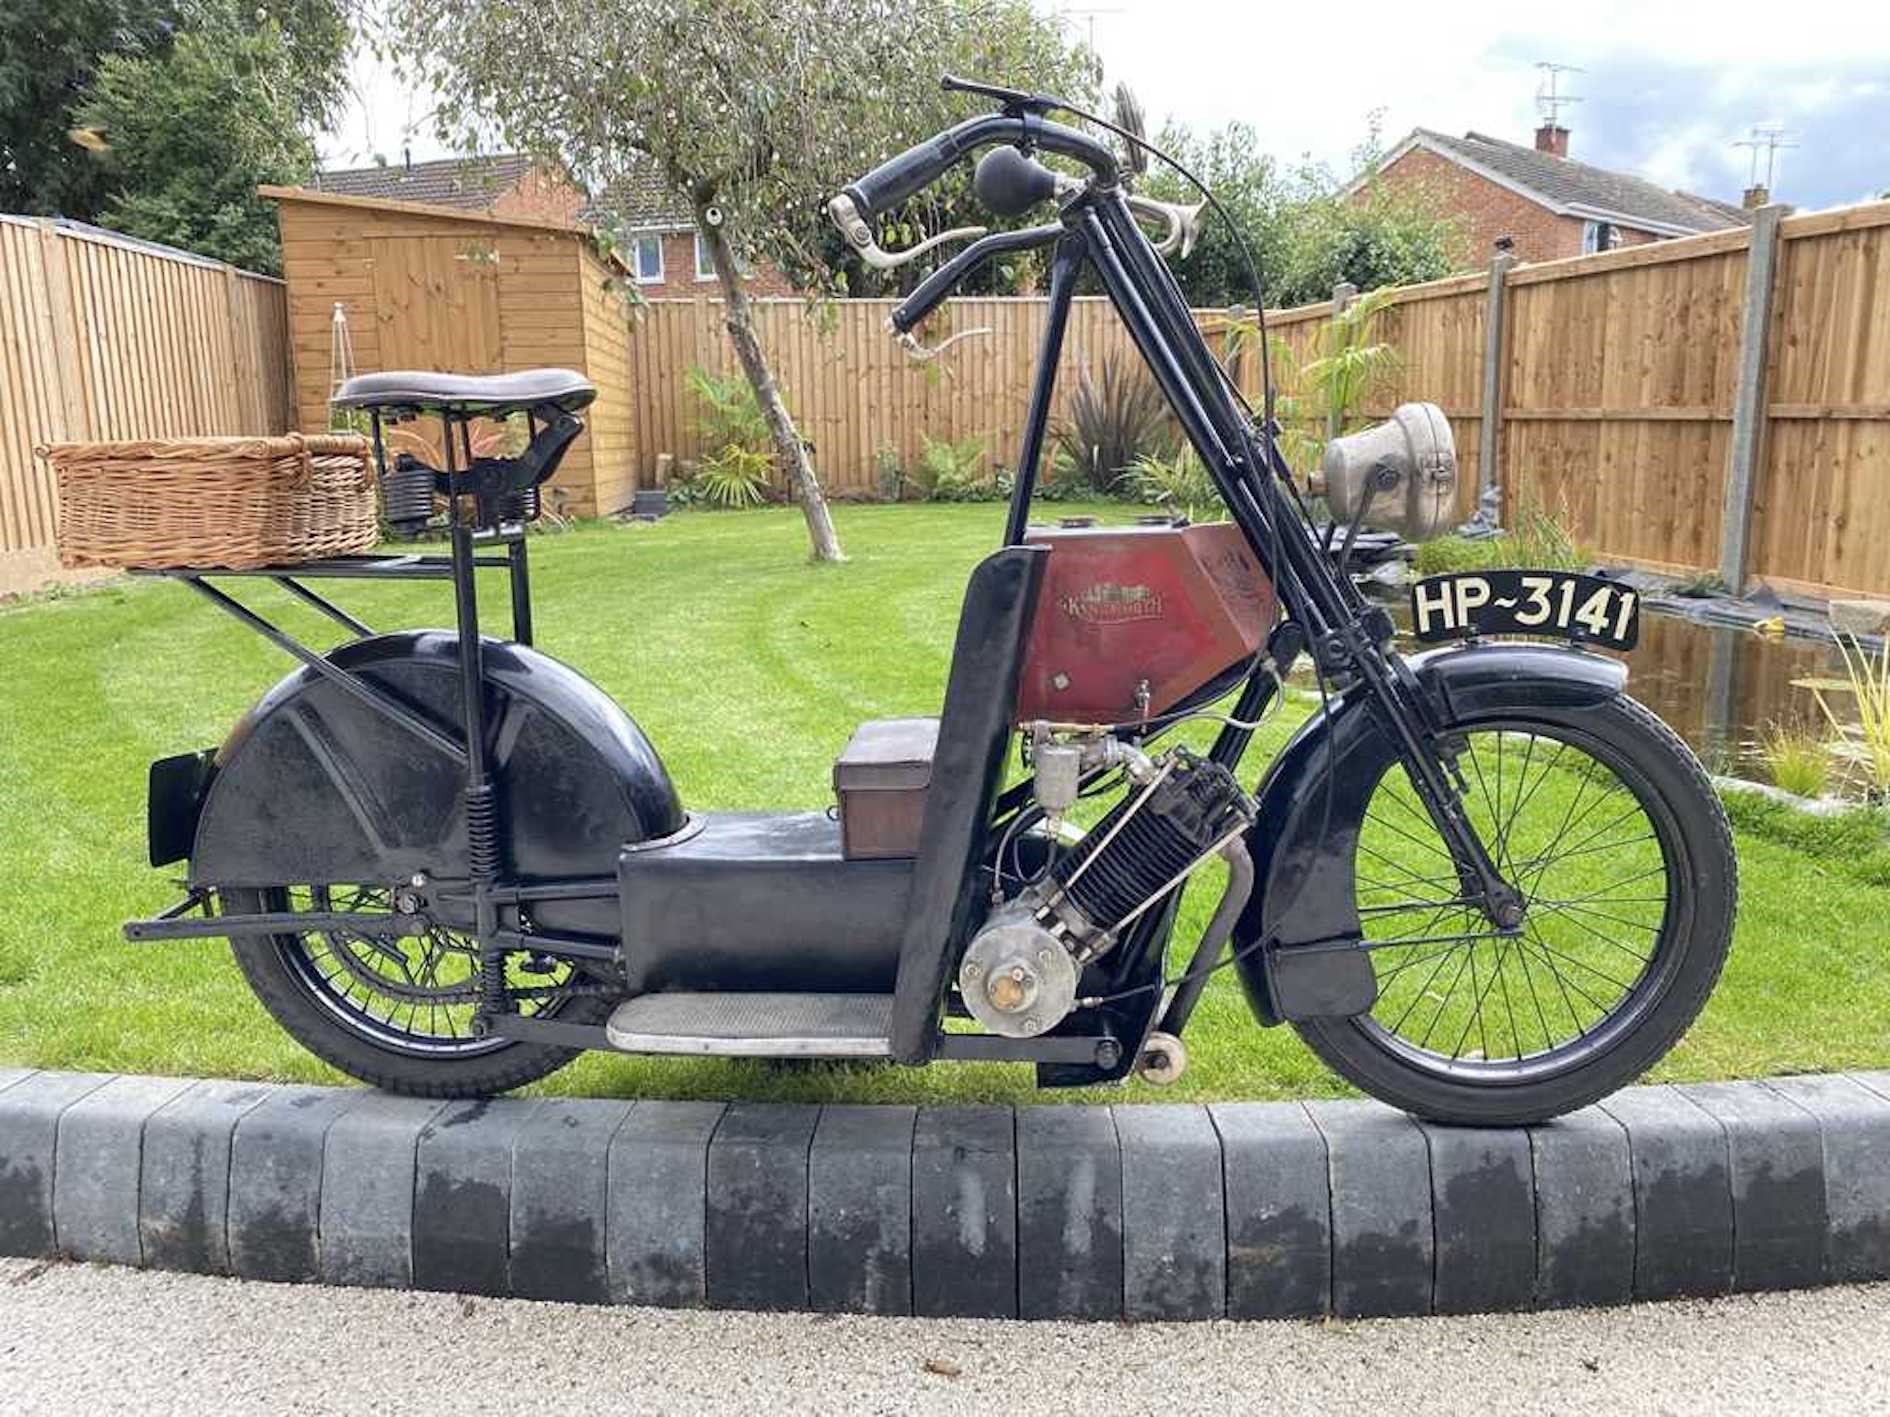 Rare Kenilworth Scooter for sale H&H Classics Auction